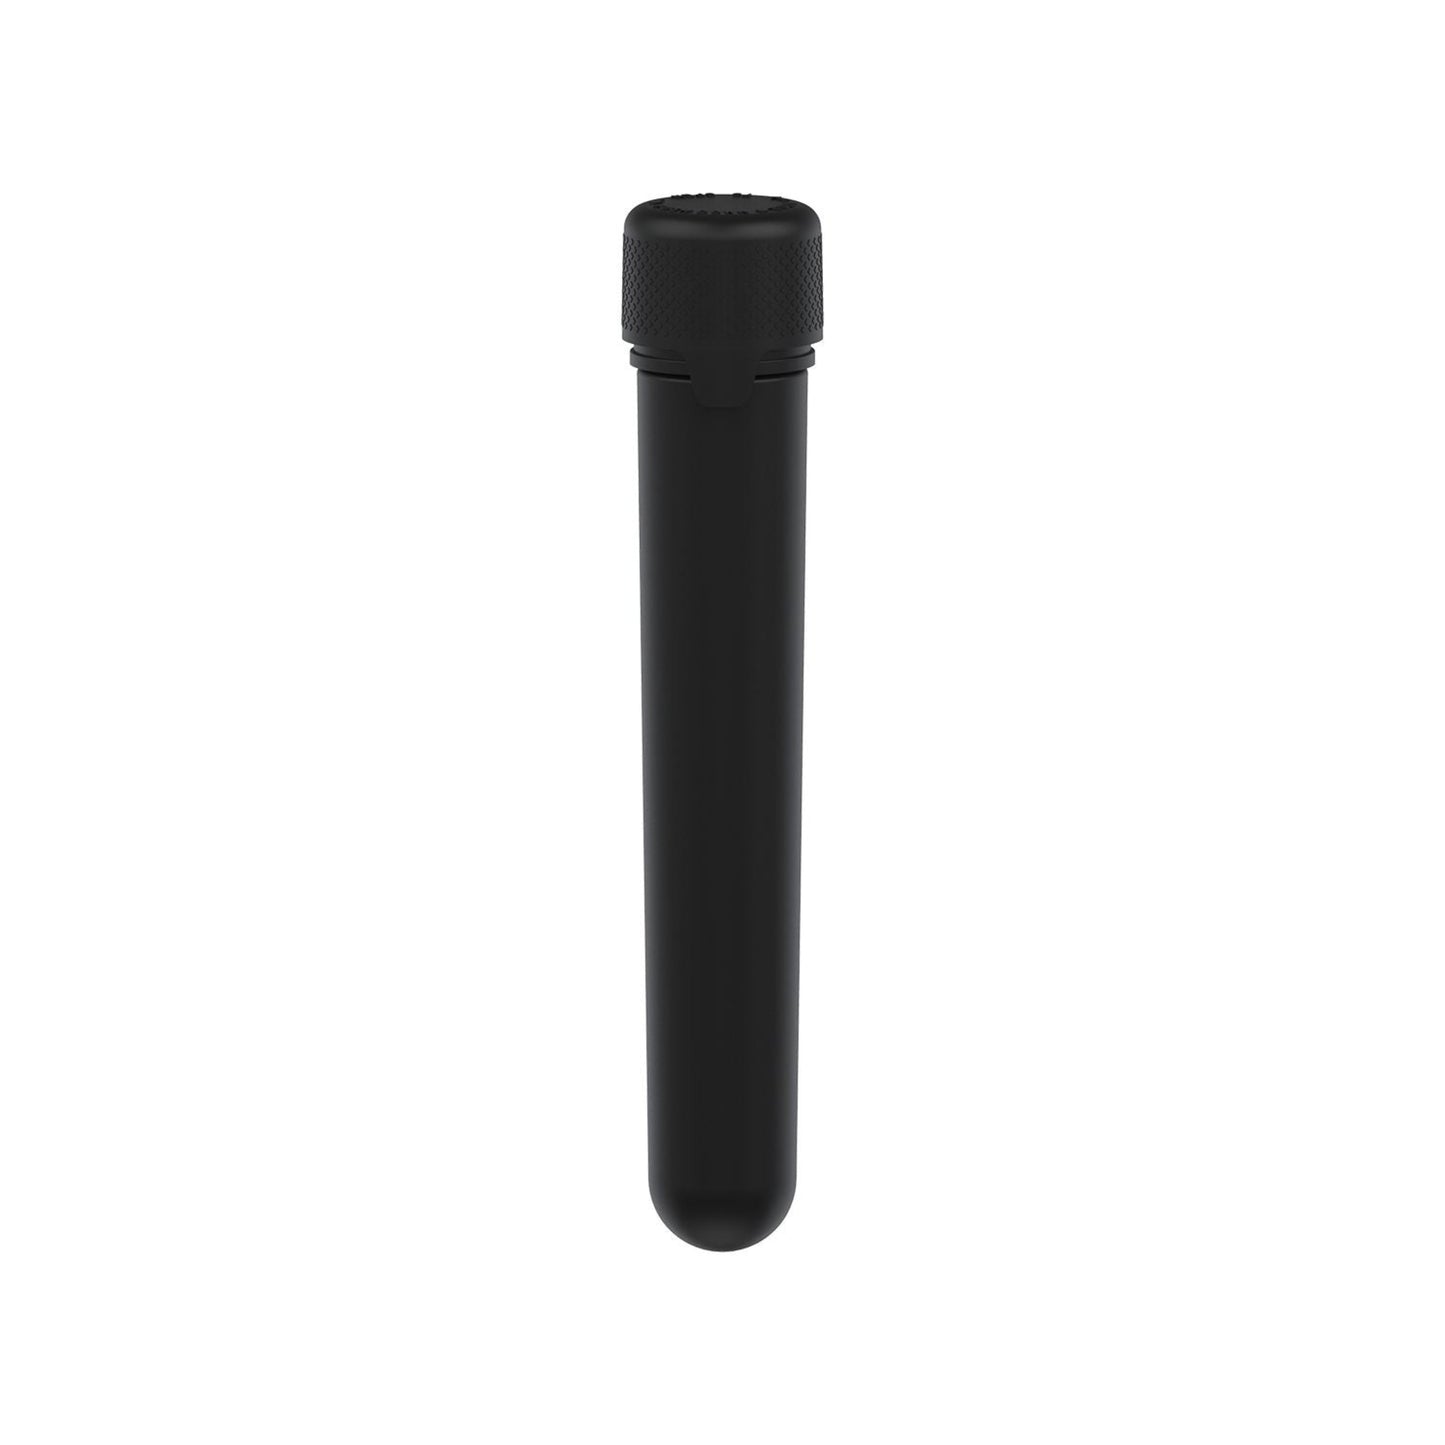 Case of 120 mm Child Proof Tube Chubby Gorilla (CASE of 500)